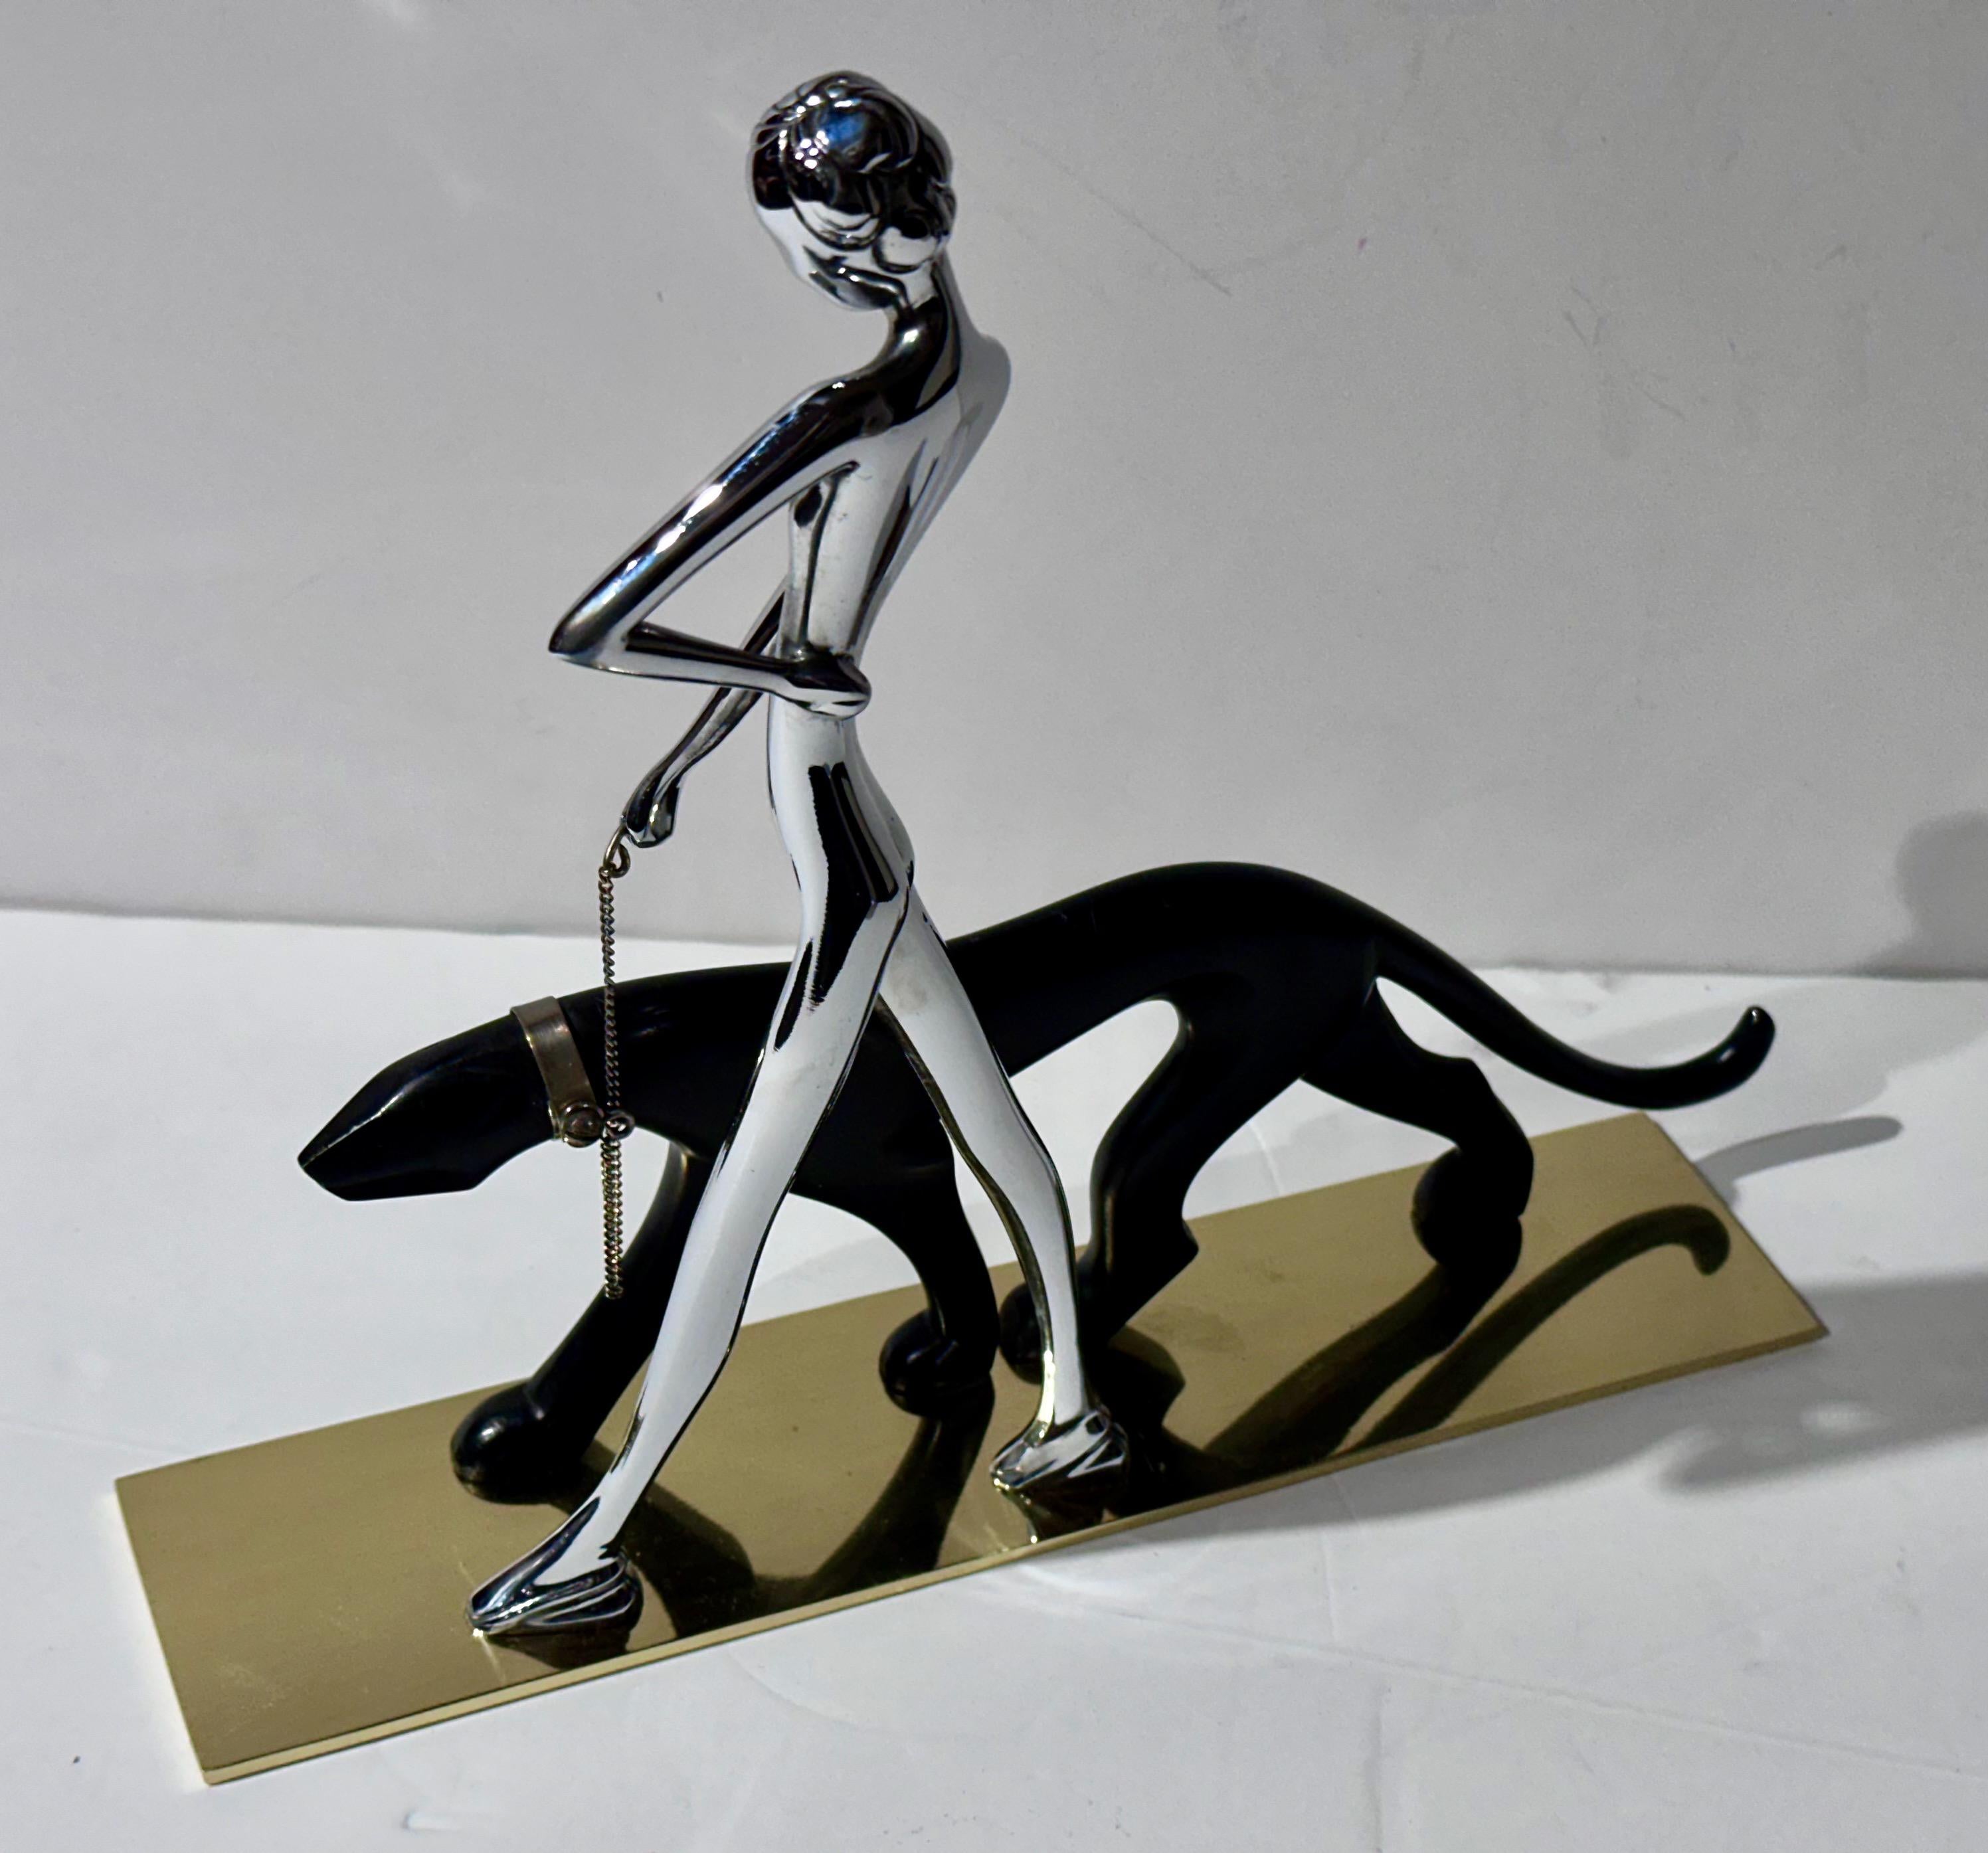 This dynamic sculpture, “Woman Walking Panther,” is a striking example of Art Deco artistry from 1930s Vienna. Crafted by the renowned Austrian sculptor Karl Hagenauer in 1928, this piece captures the essence of the era’s style with its elegant nude